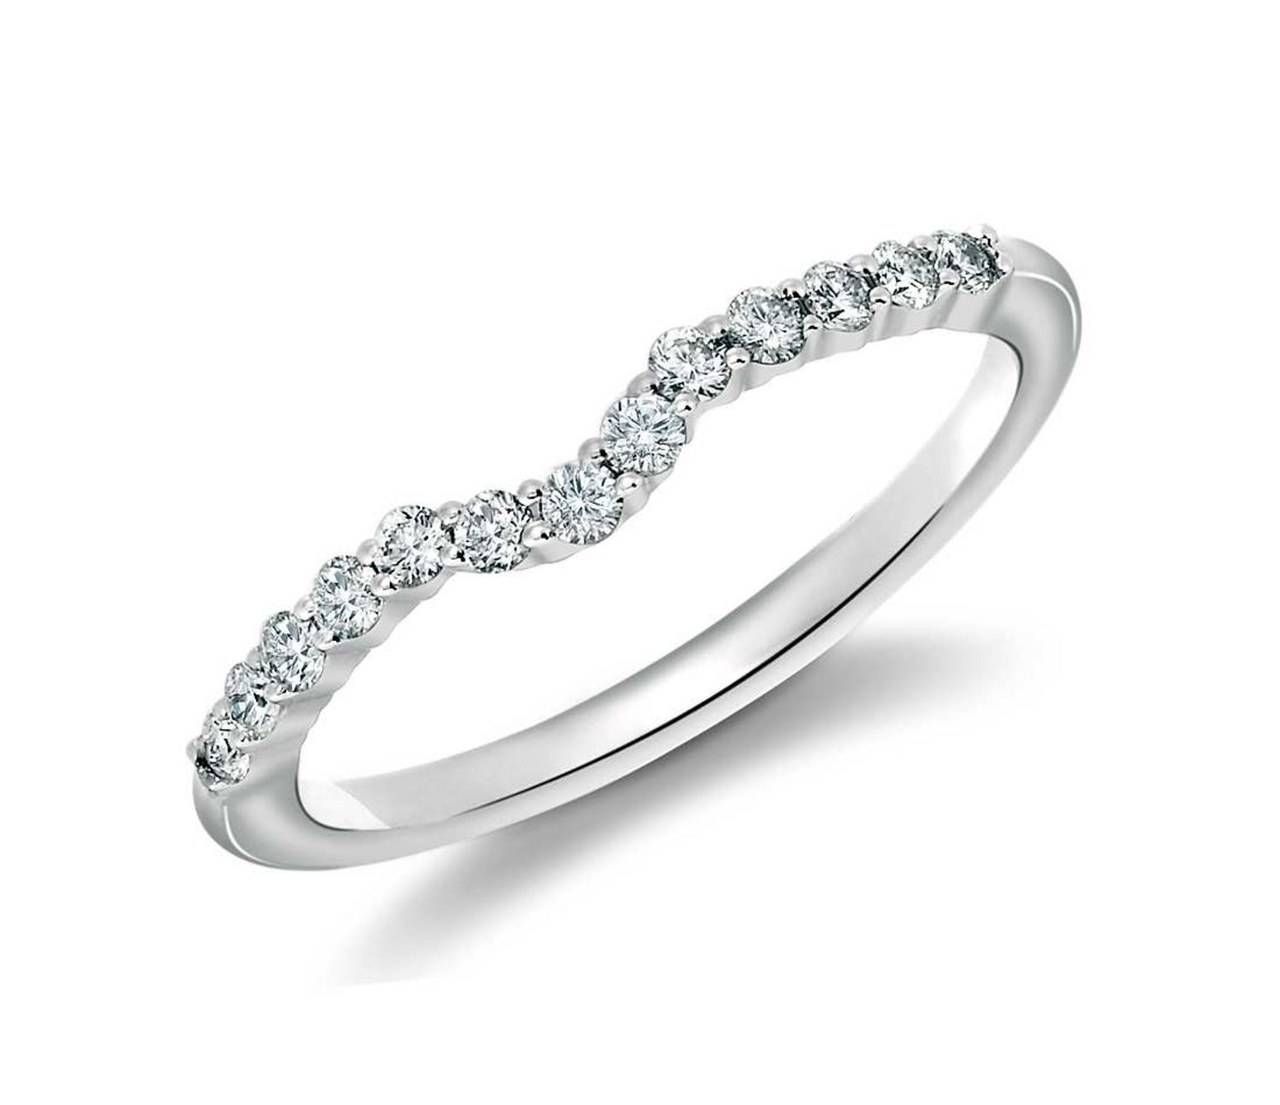 Wedding Ring For A Halo Engagement Ring; Wedding Band For Halo Pertaining To Best Wedding Bands For Halo Engagement Rings (View 11 of 15)